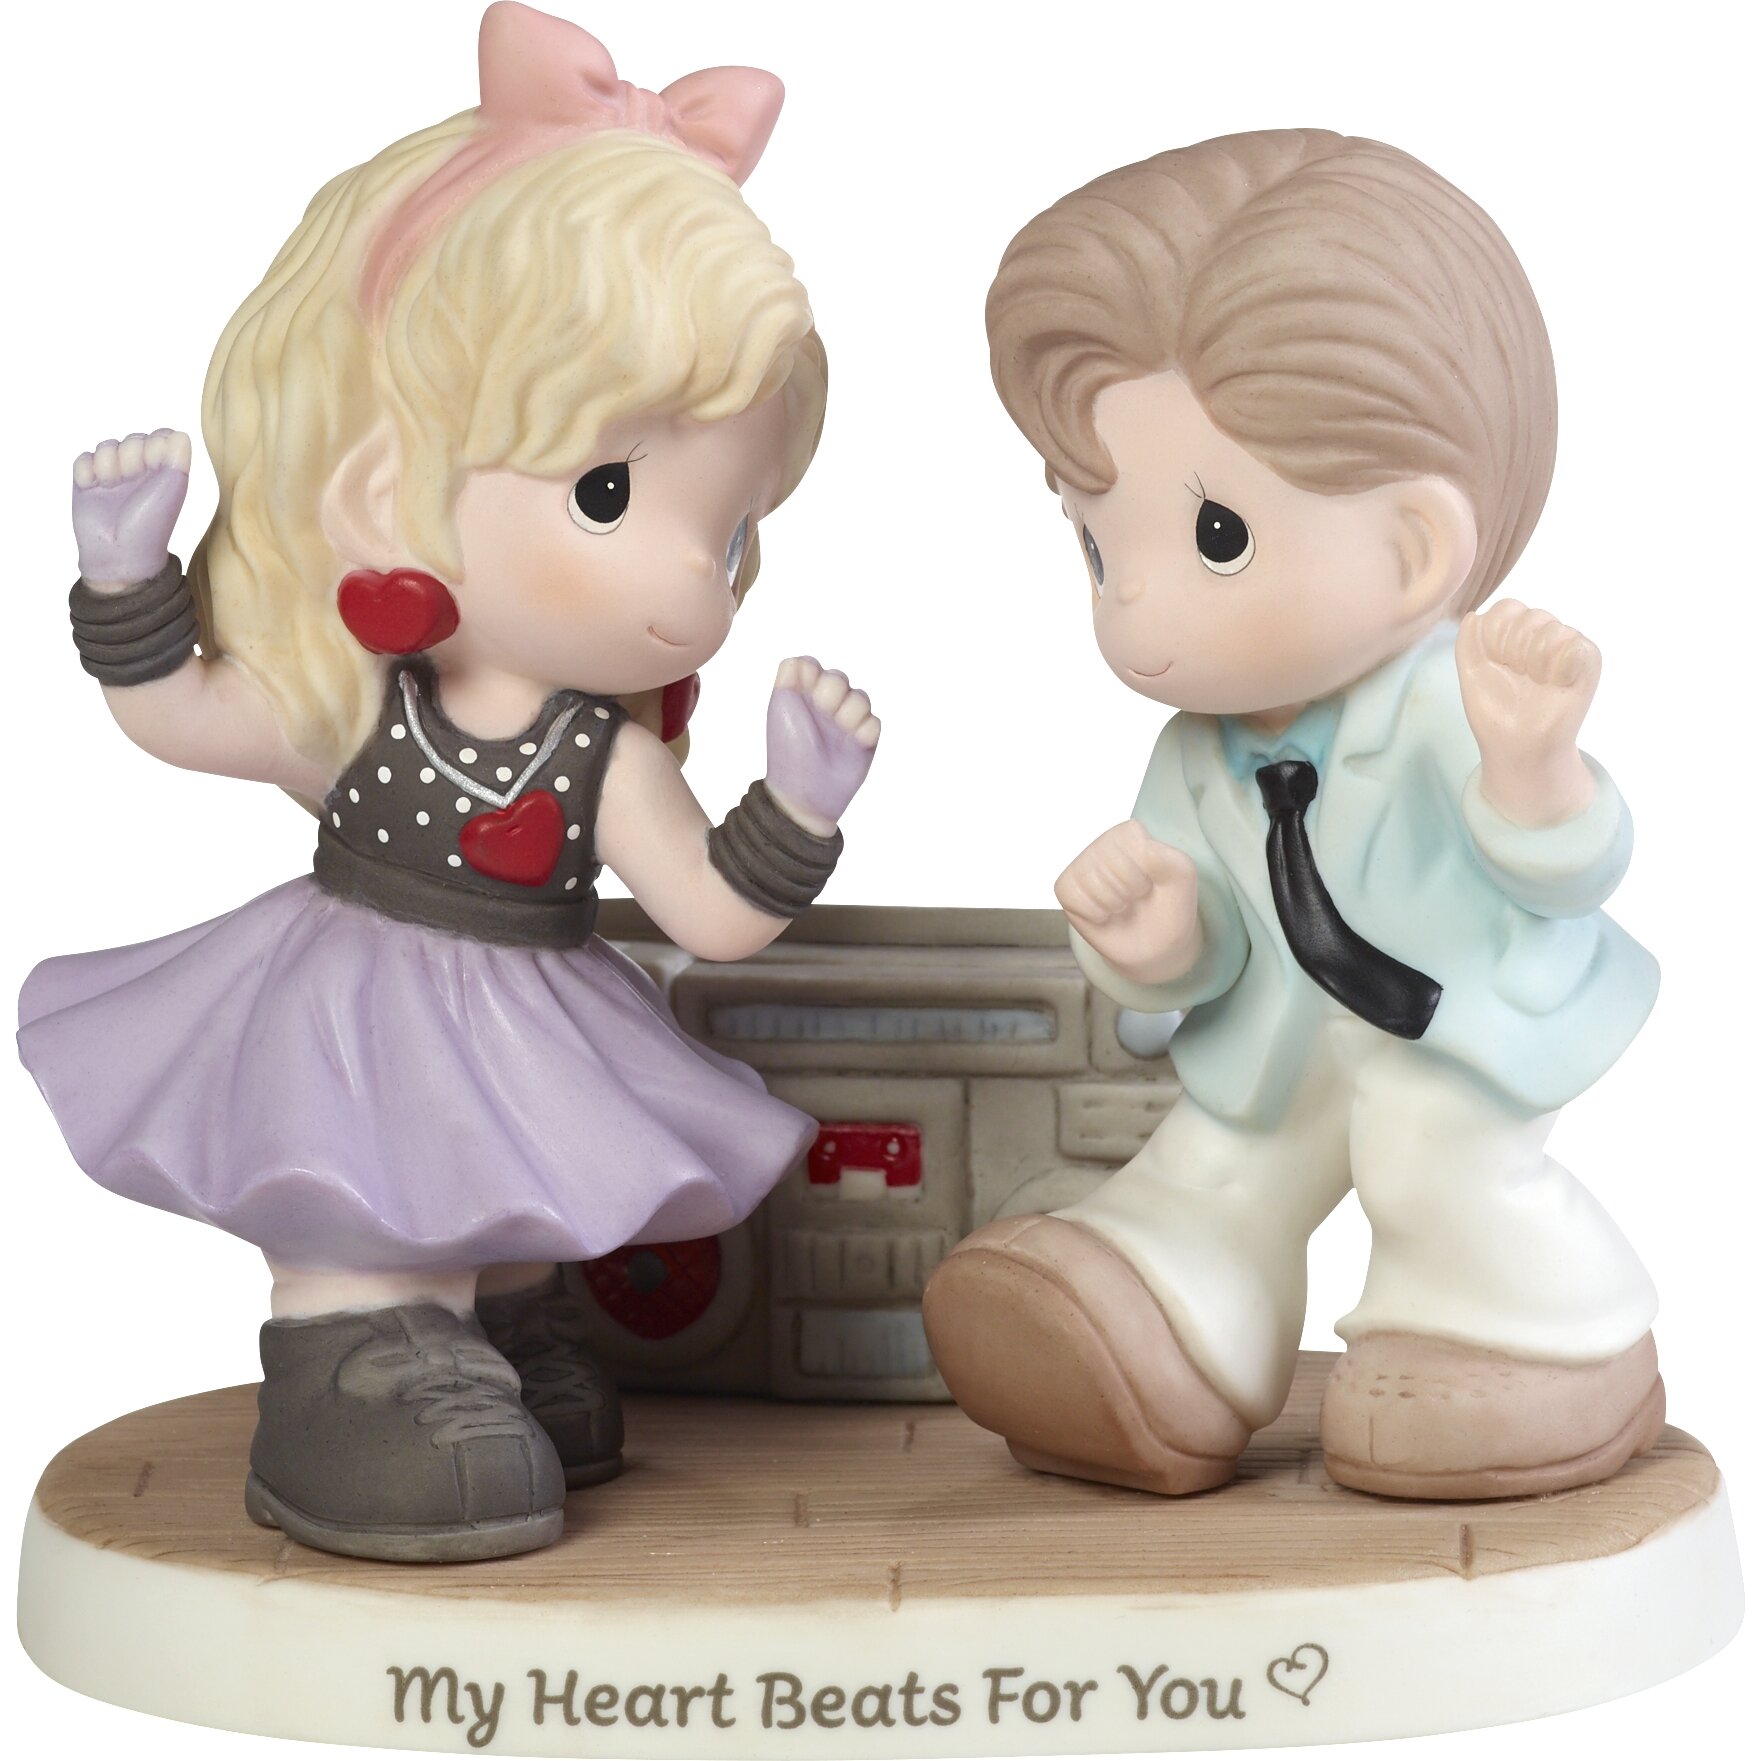 Share Loving Precious Moments with Your Valentine #Sweet2020 - Mom Does  Reviews